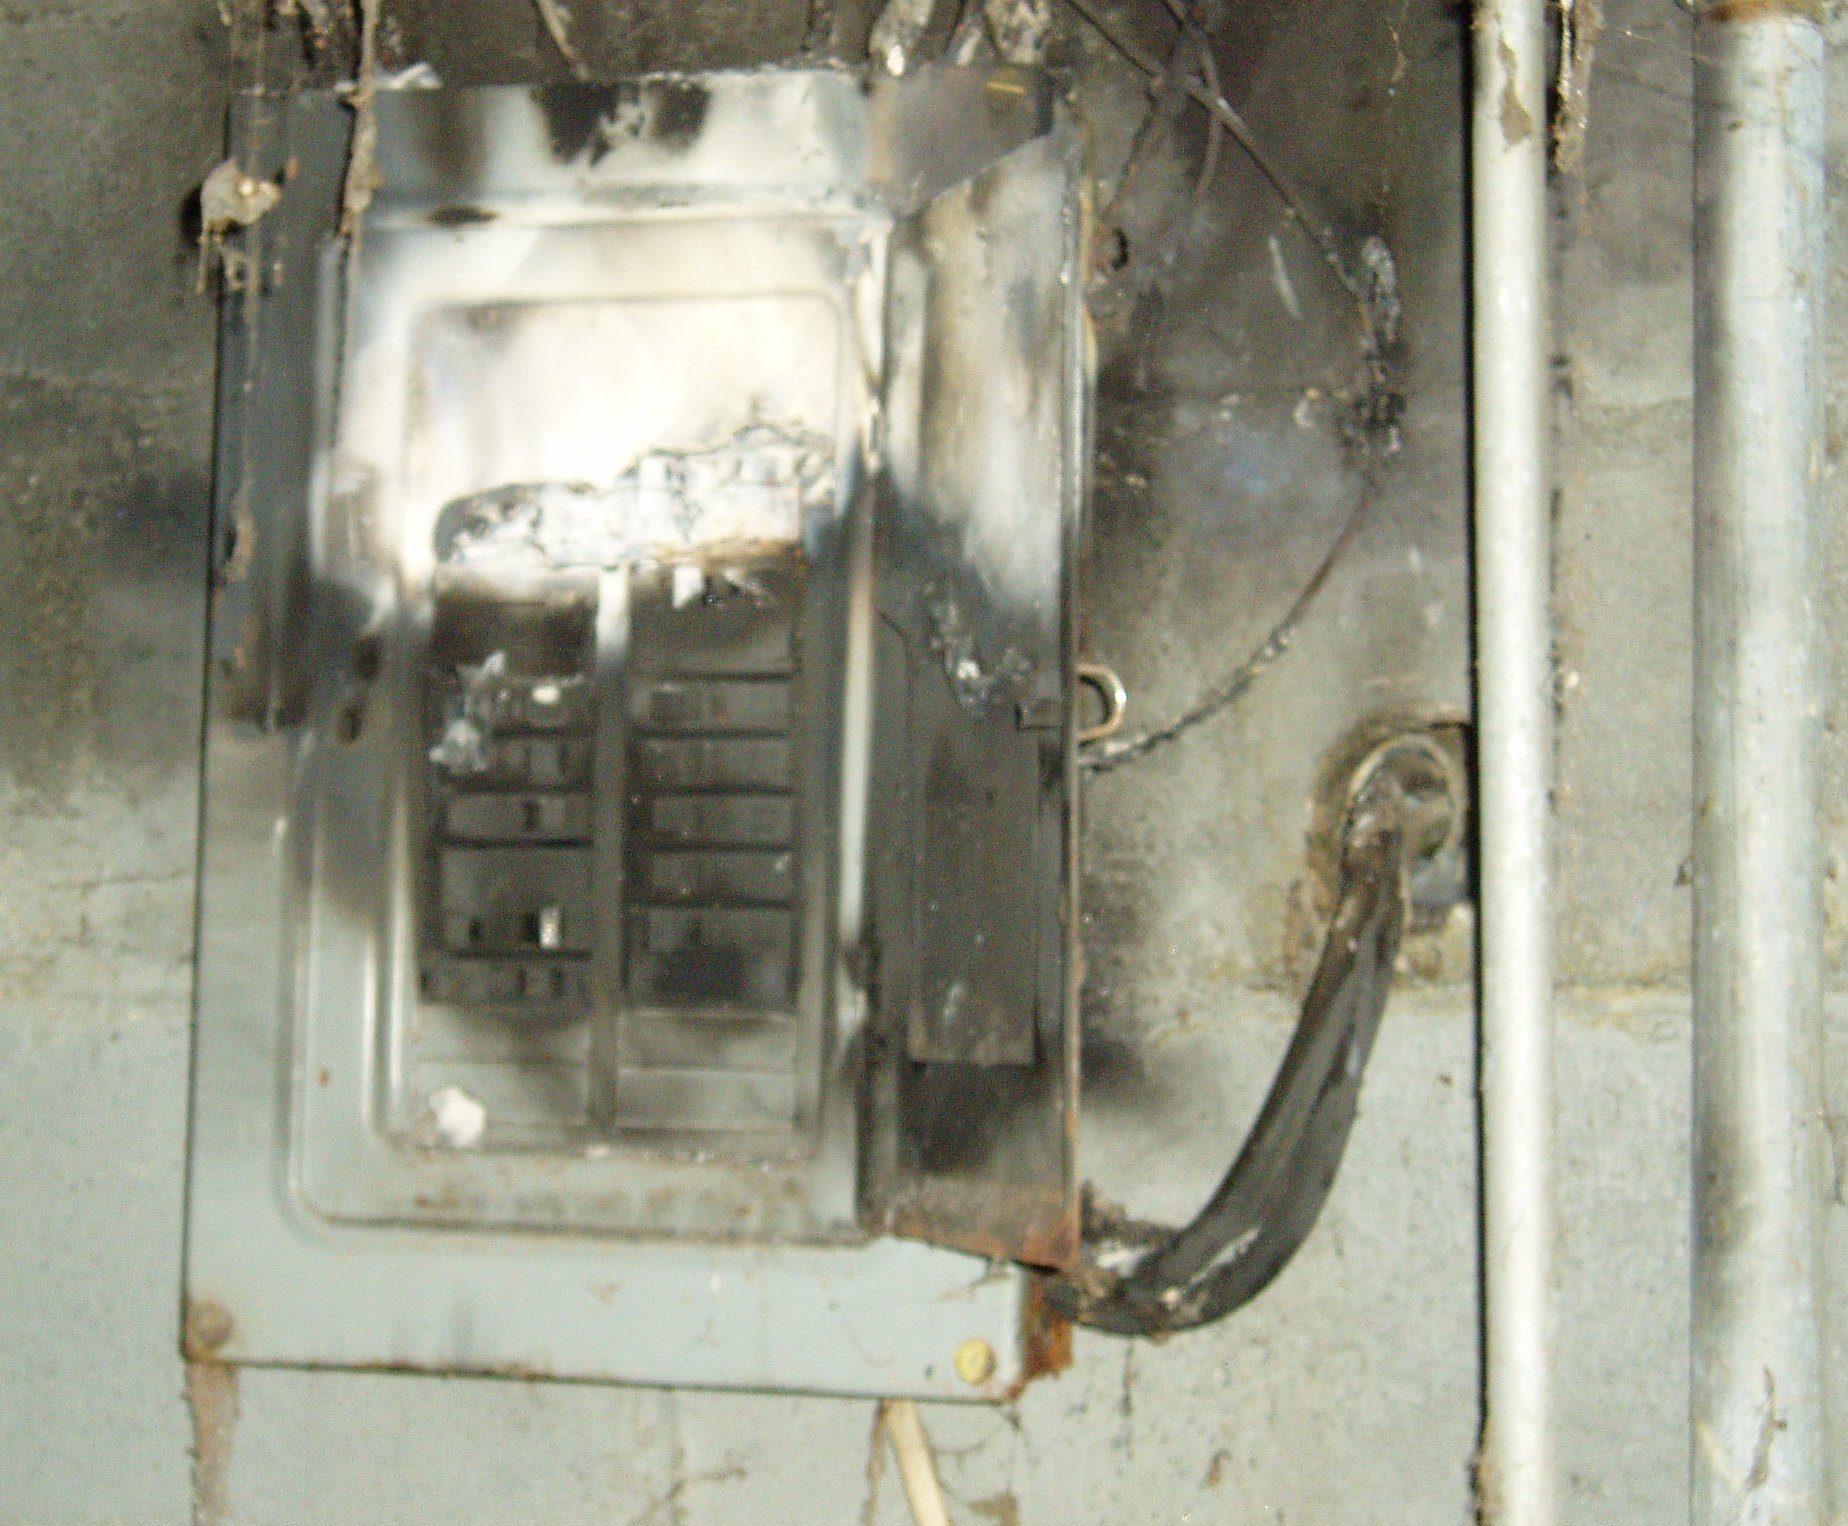 Electrical Panel - Scorched, before repair